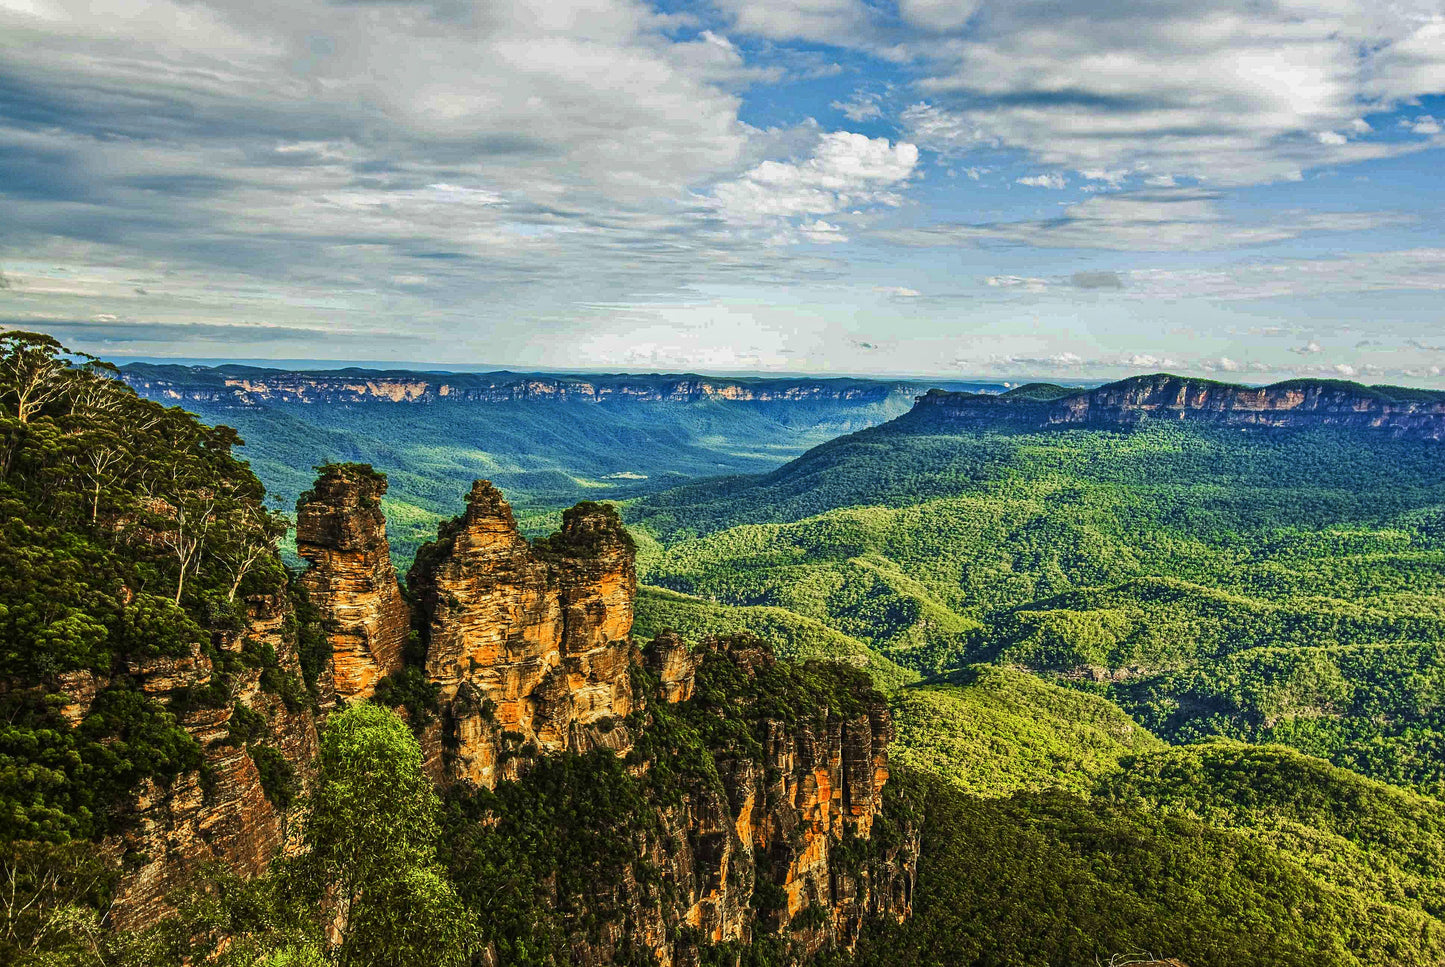 Alessandra Mattanza | IF ROCKS COULD TALK, The Three Sisters, Australia. Towering over the Blue Mountains of New South Wales. Available as an art print or as a photographic print on acrylic glass.